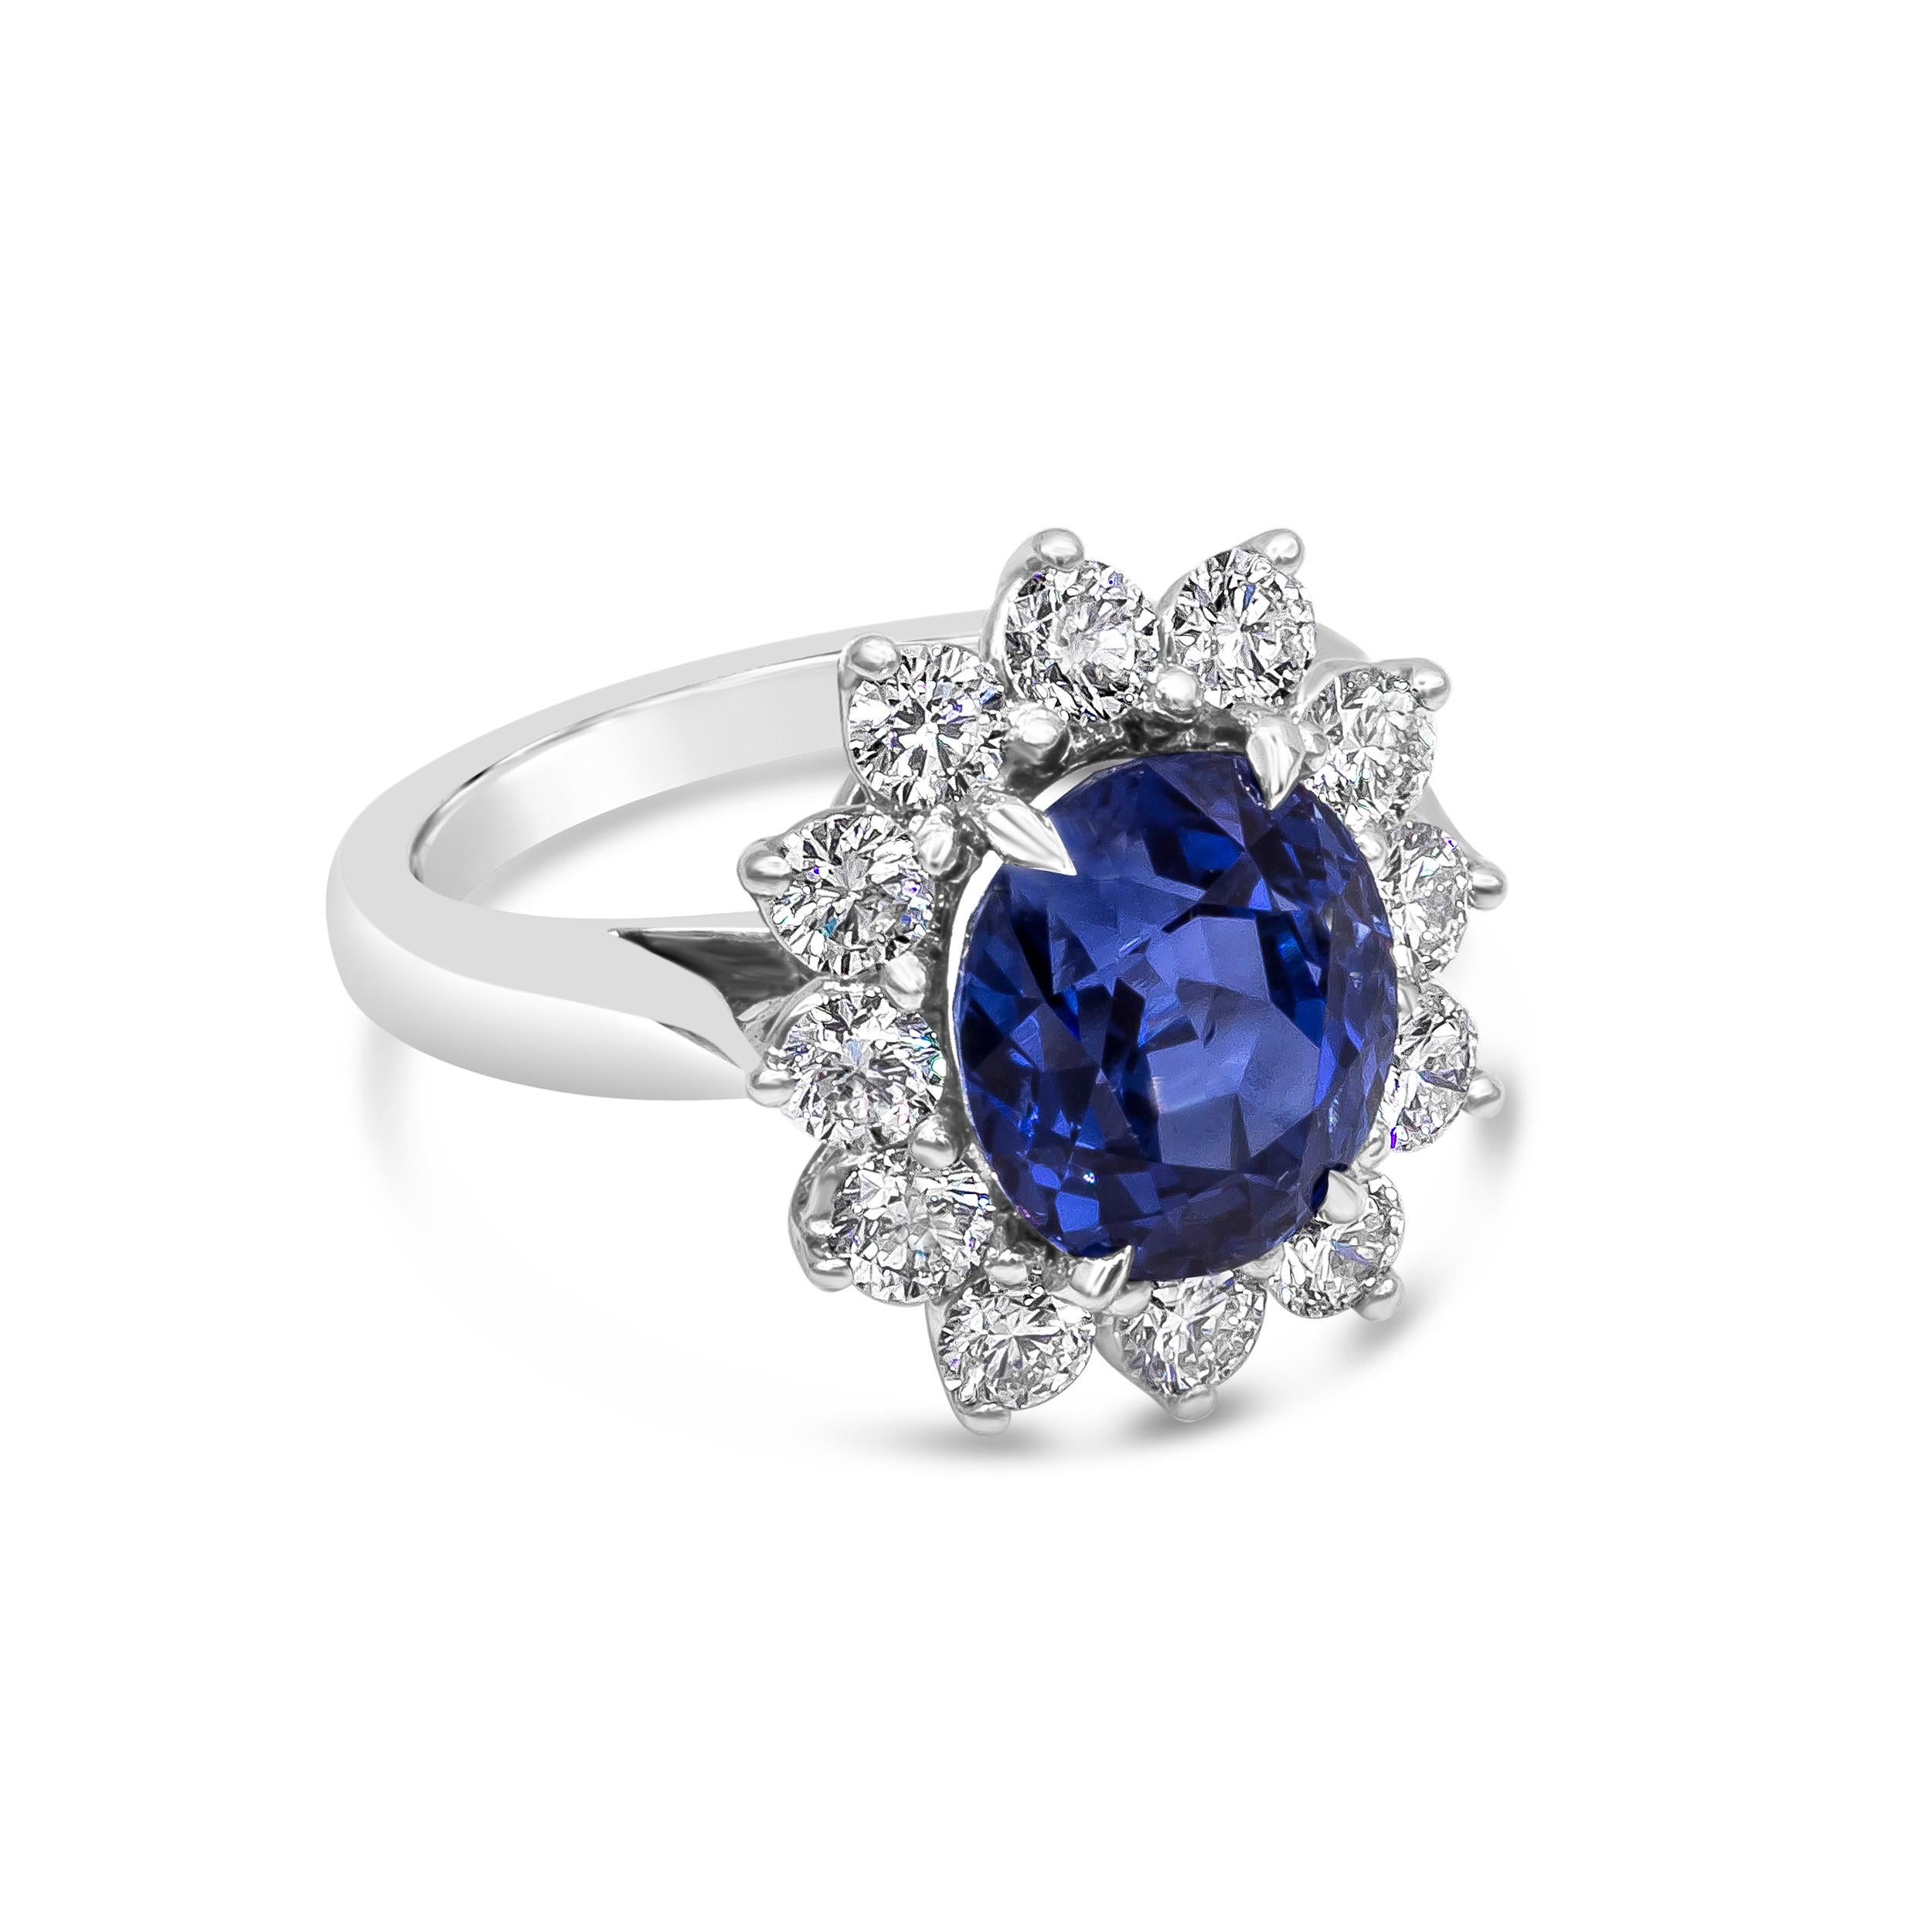 A color-rich piece of jewelry showcasing a rare oval cut 5.00 carat blue sapphire certified by GIA as natural with no indications of heat treatment. Surrounding the sapphire is a row of 12 round brilliant diamonds weighing 1.30 carats total, in a